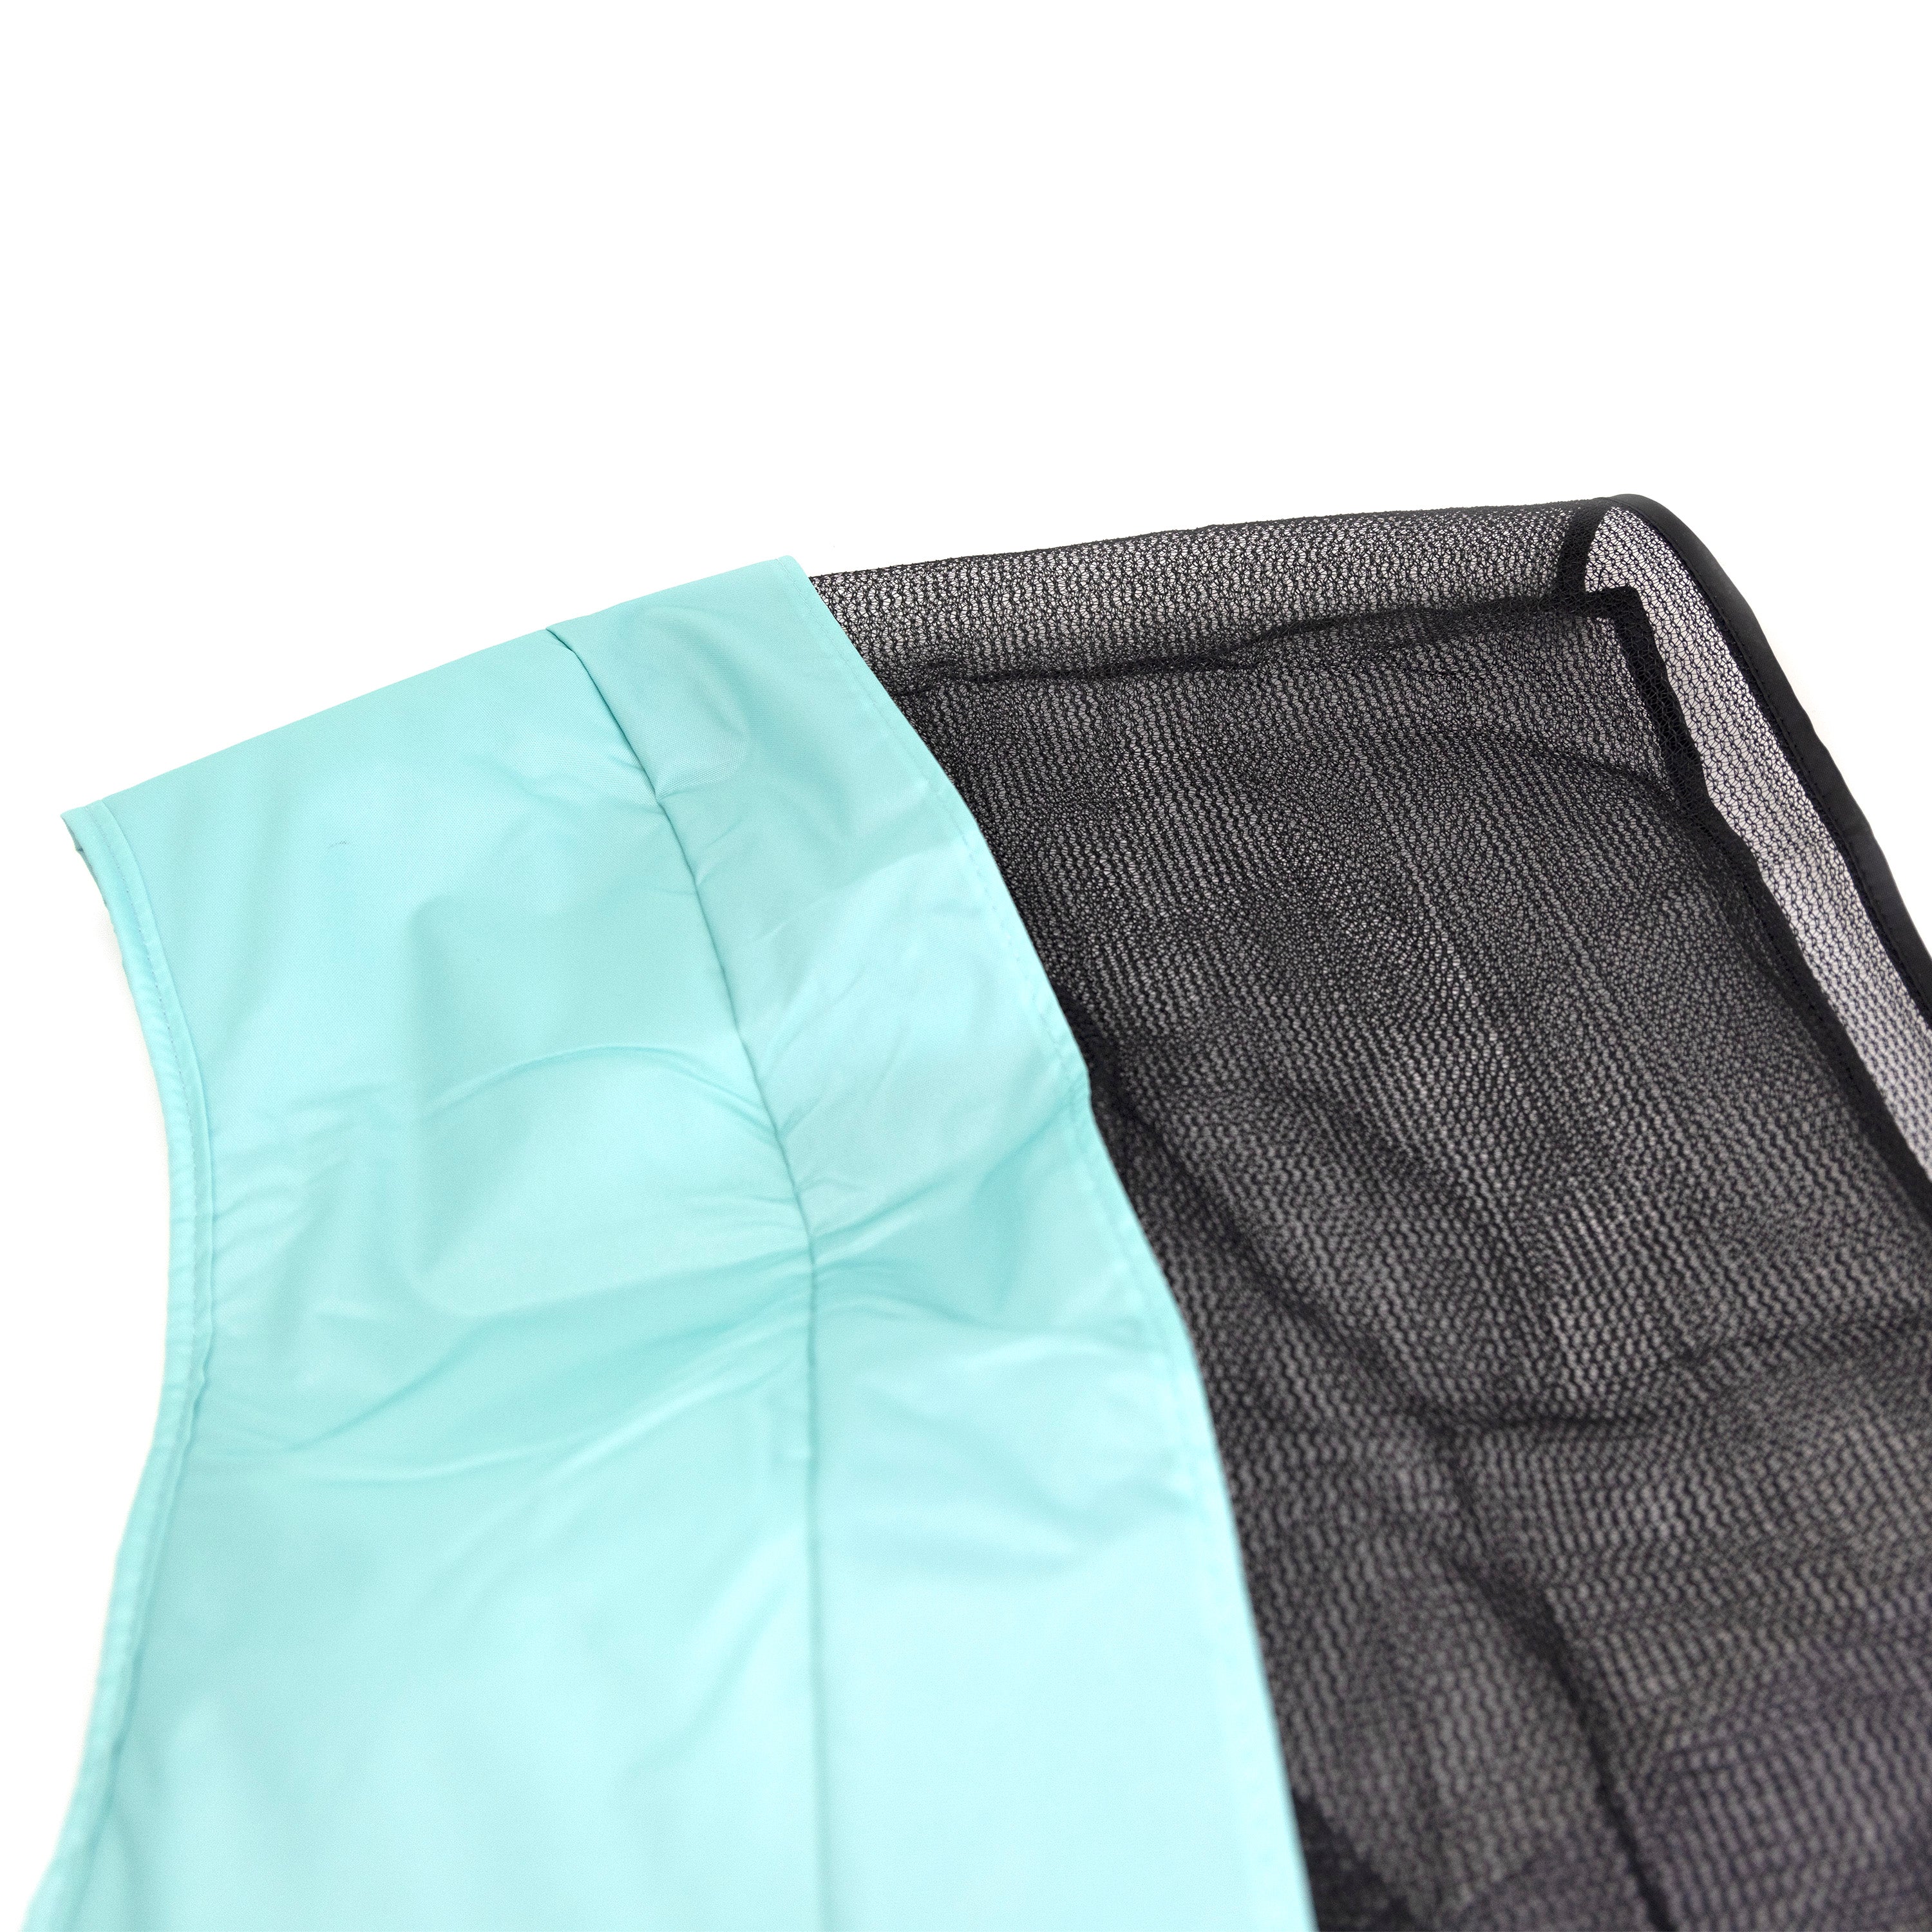 48" Teal Spring Pad with Lower Net (Key 7)